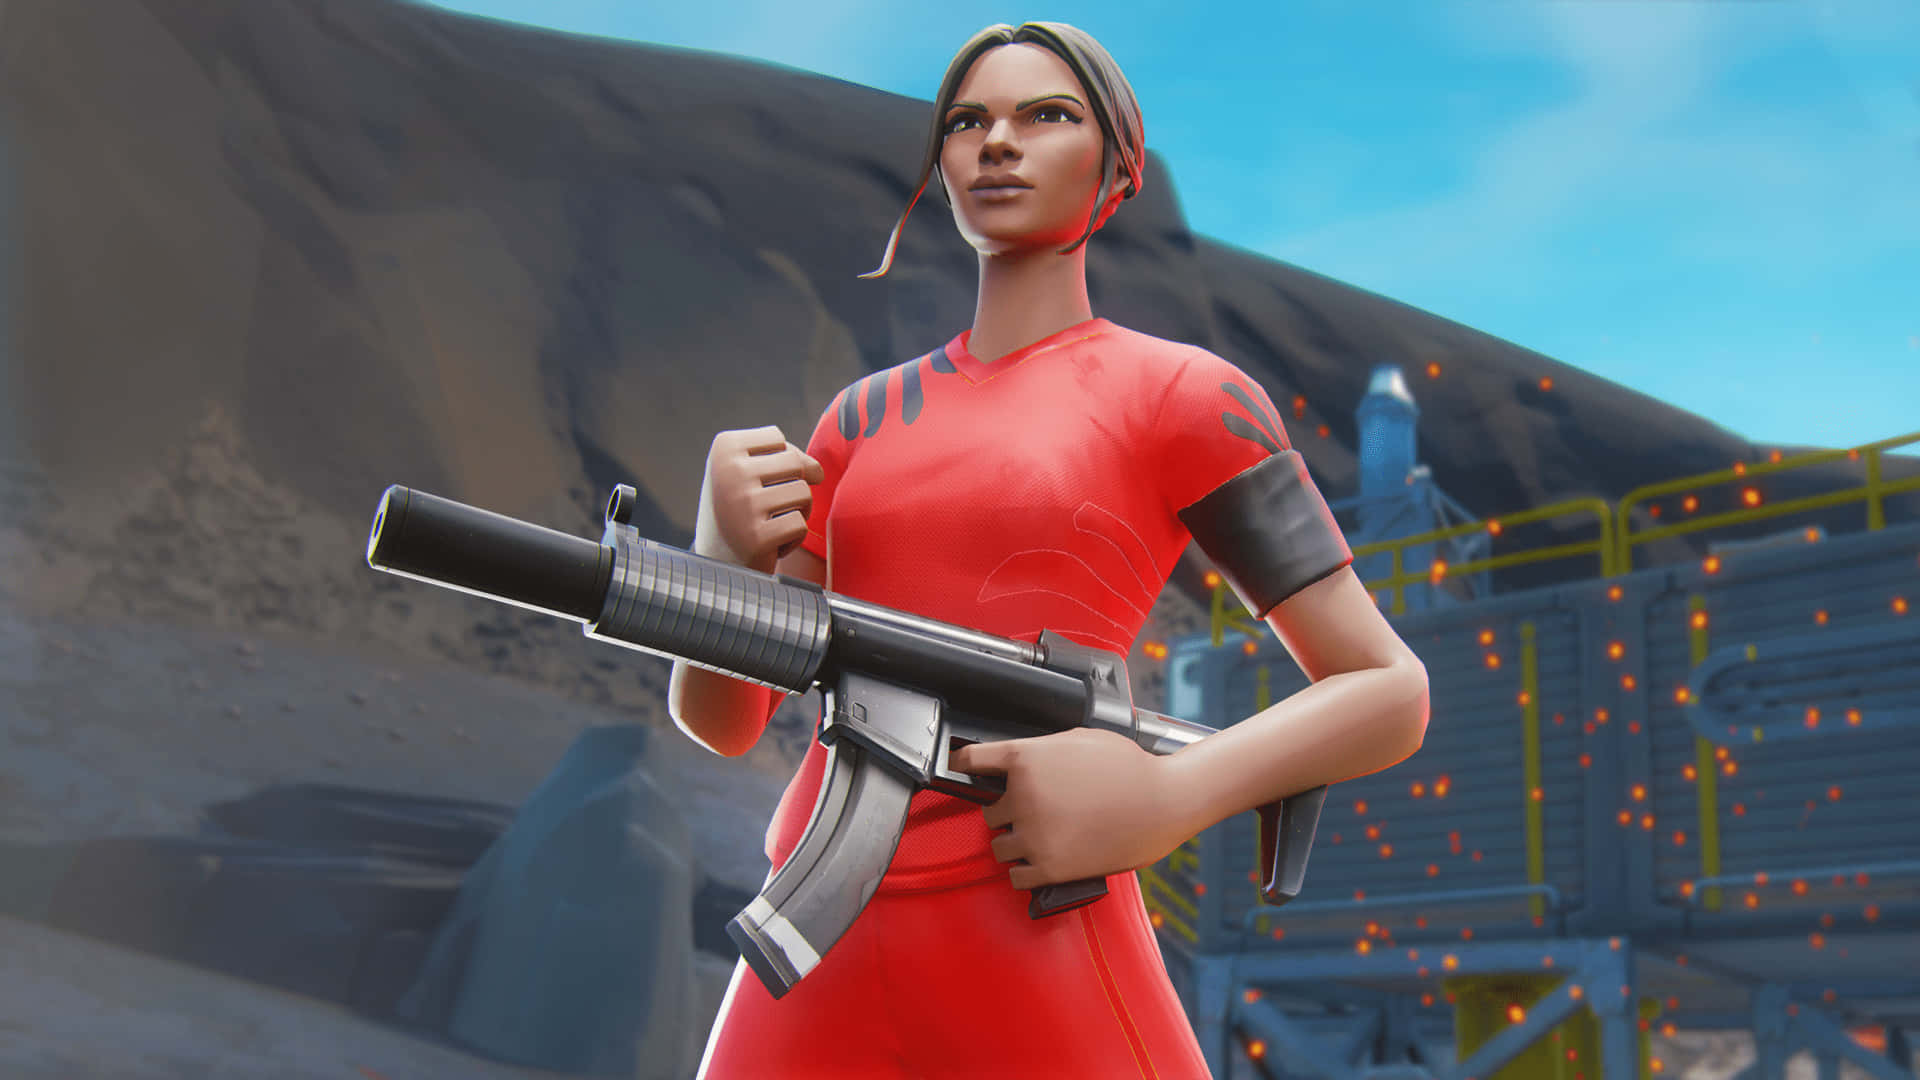 “Rise to Victory with the Poised Playmaker” Wallpaper